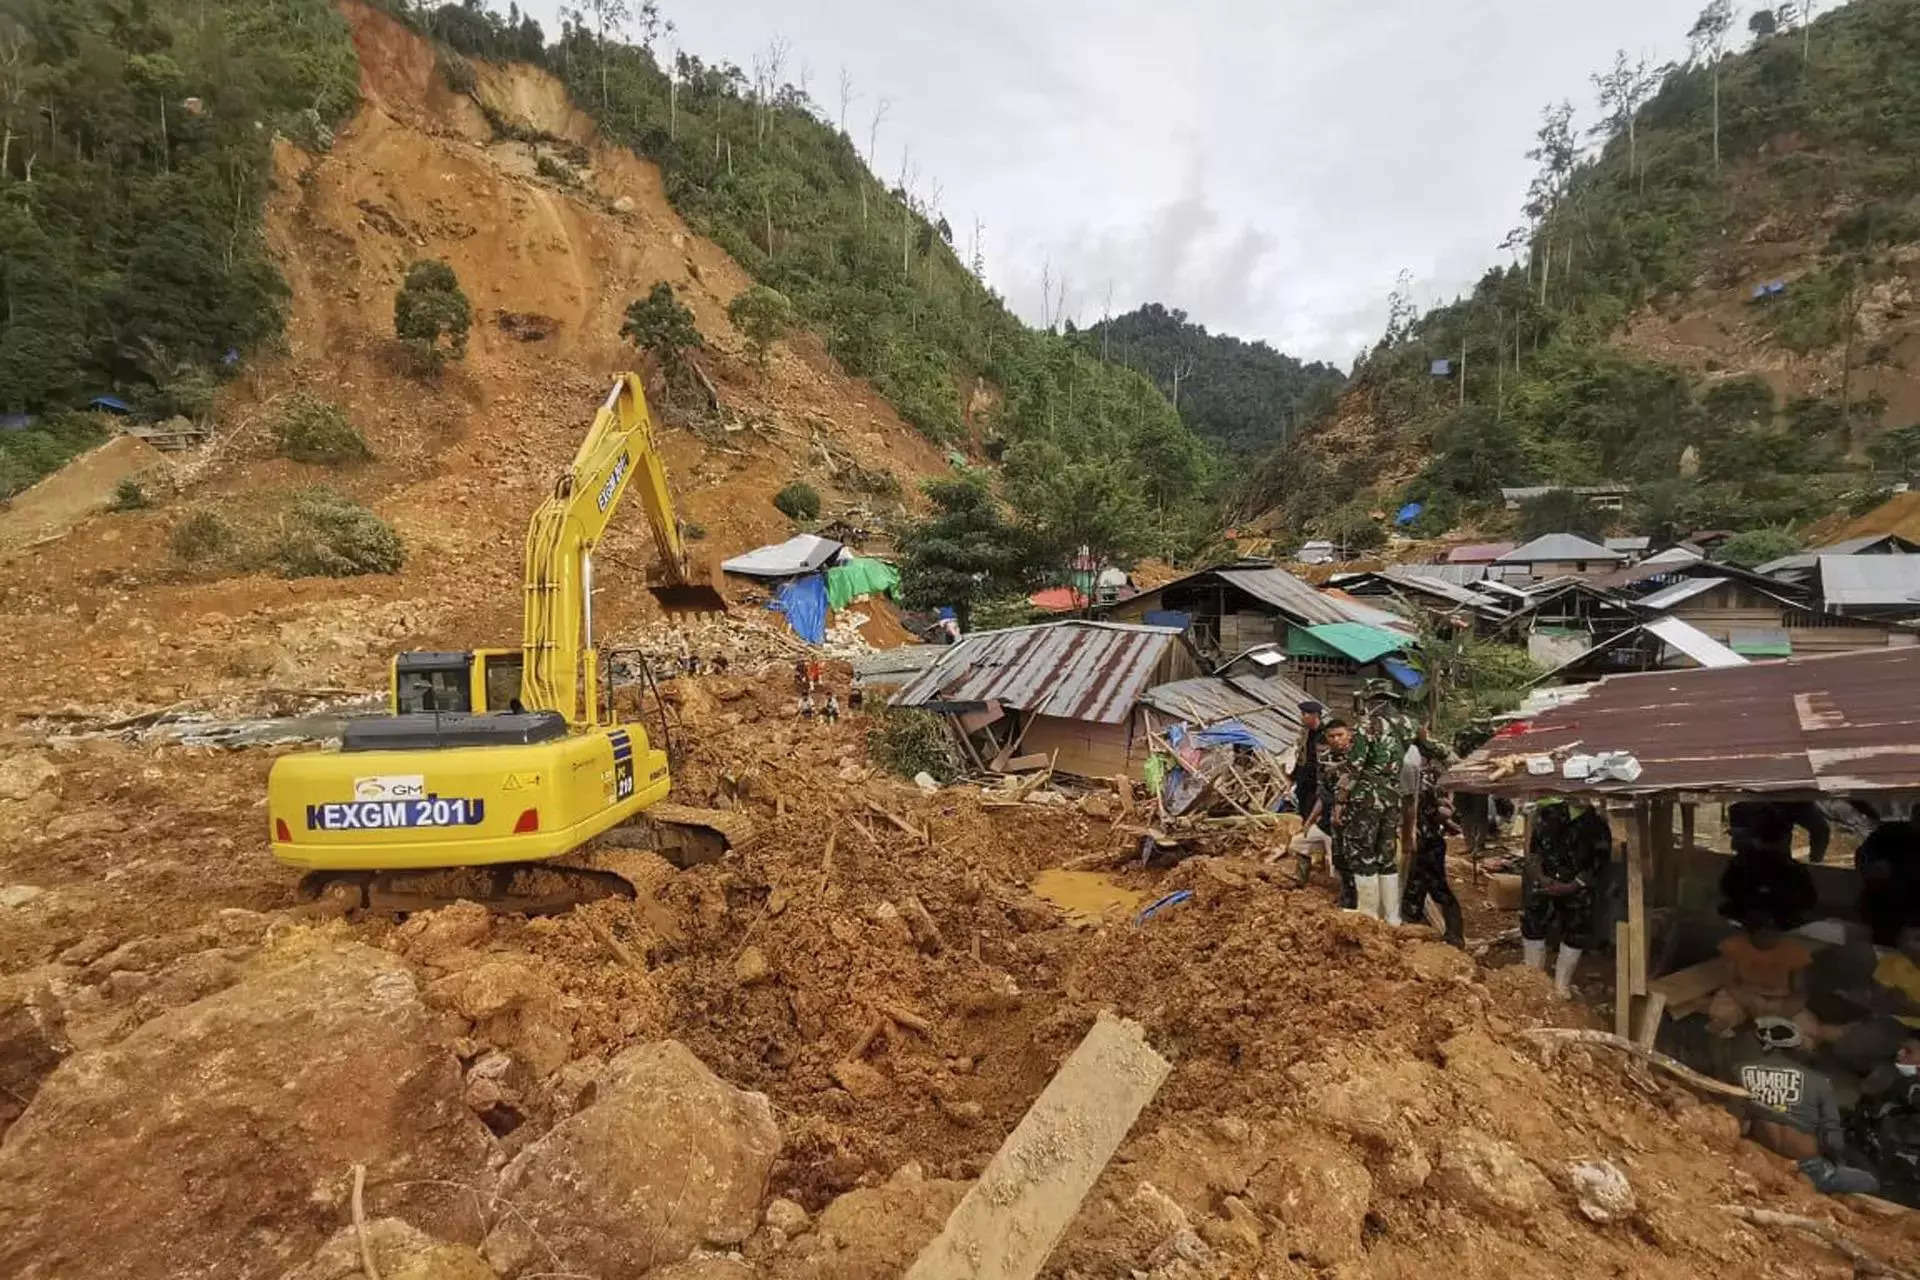 65 people believed to be missing after landslide in Nepal: Media reports 